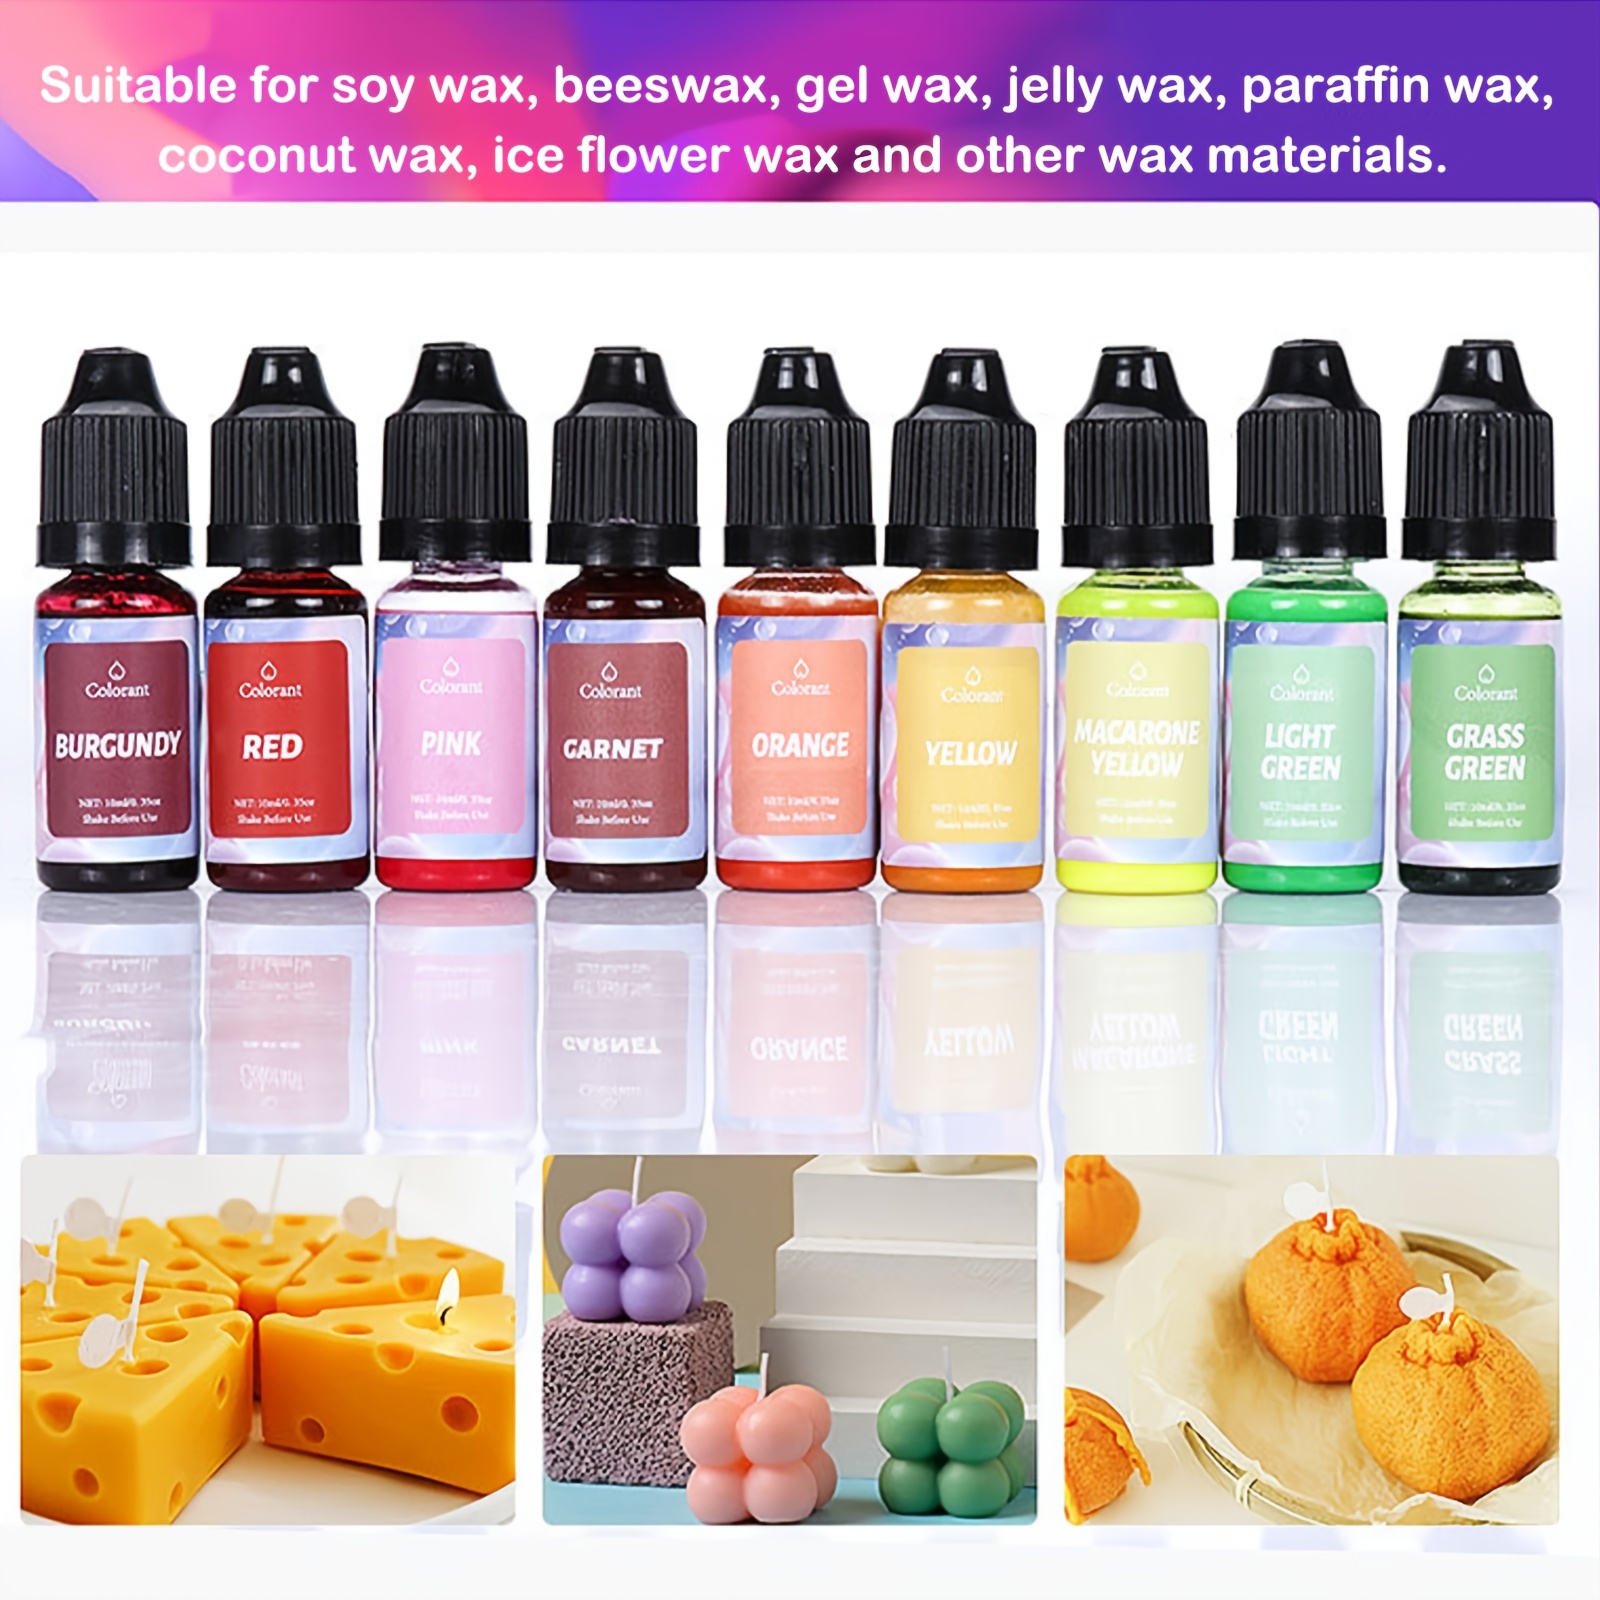 18pcs Candle Color Dye Non-Toxic For DIY Candle Making Supplies - Vibrant  Concentrated Candle Coloring For Soy Wax Dyes, Beeswax, Gel Wax, Candle Maki